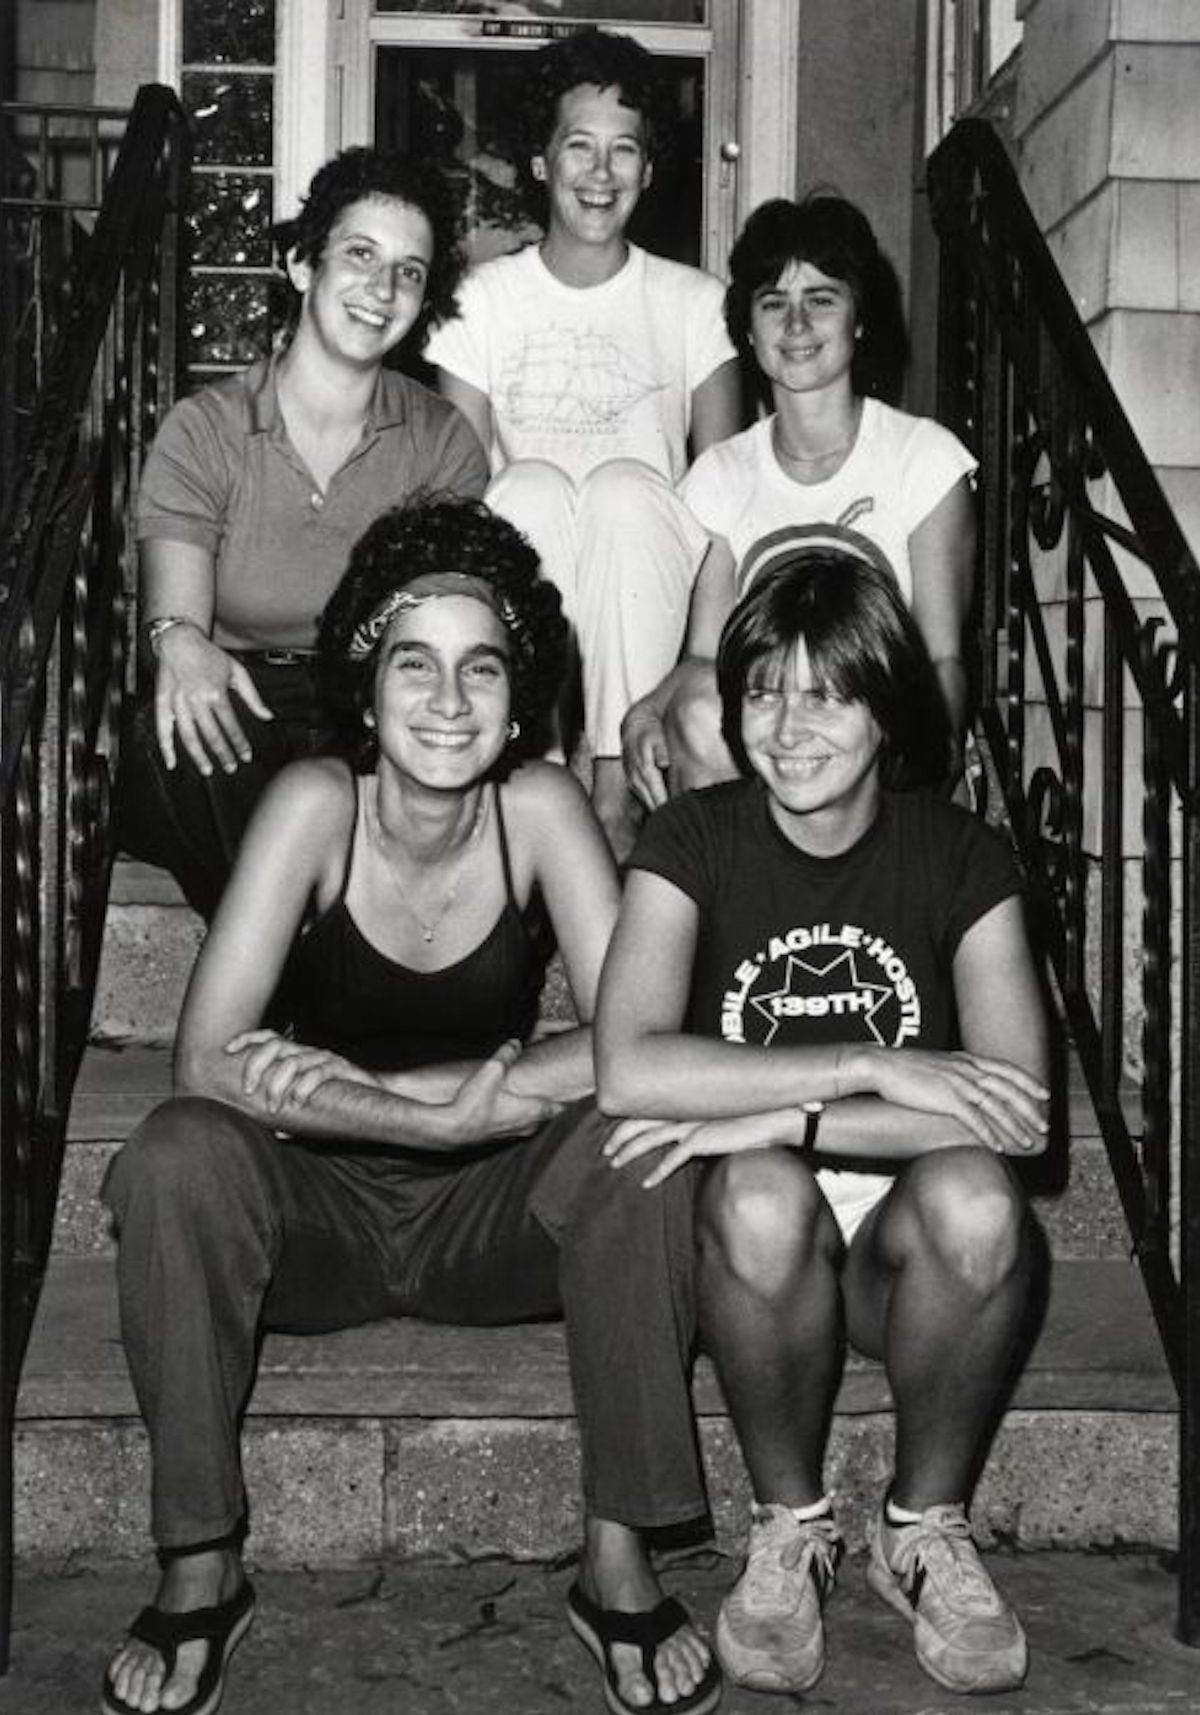 Mood Swings, a lesbian improv group about women in recovery from addiction. L-R bottom row: Cheryl Qamar and Liz Hjeltness (her lover at the time). L-R middle row: Alice Levine and Karen Kirby. Back row: Blitzen, the Director. Photo courtesy of Cheryl Qamar. 